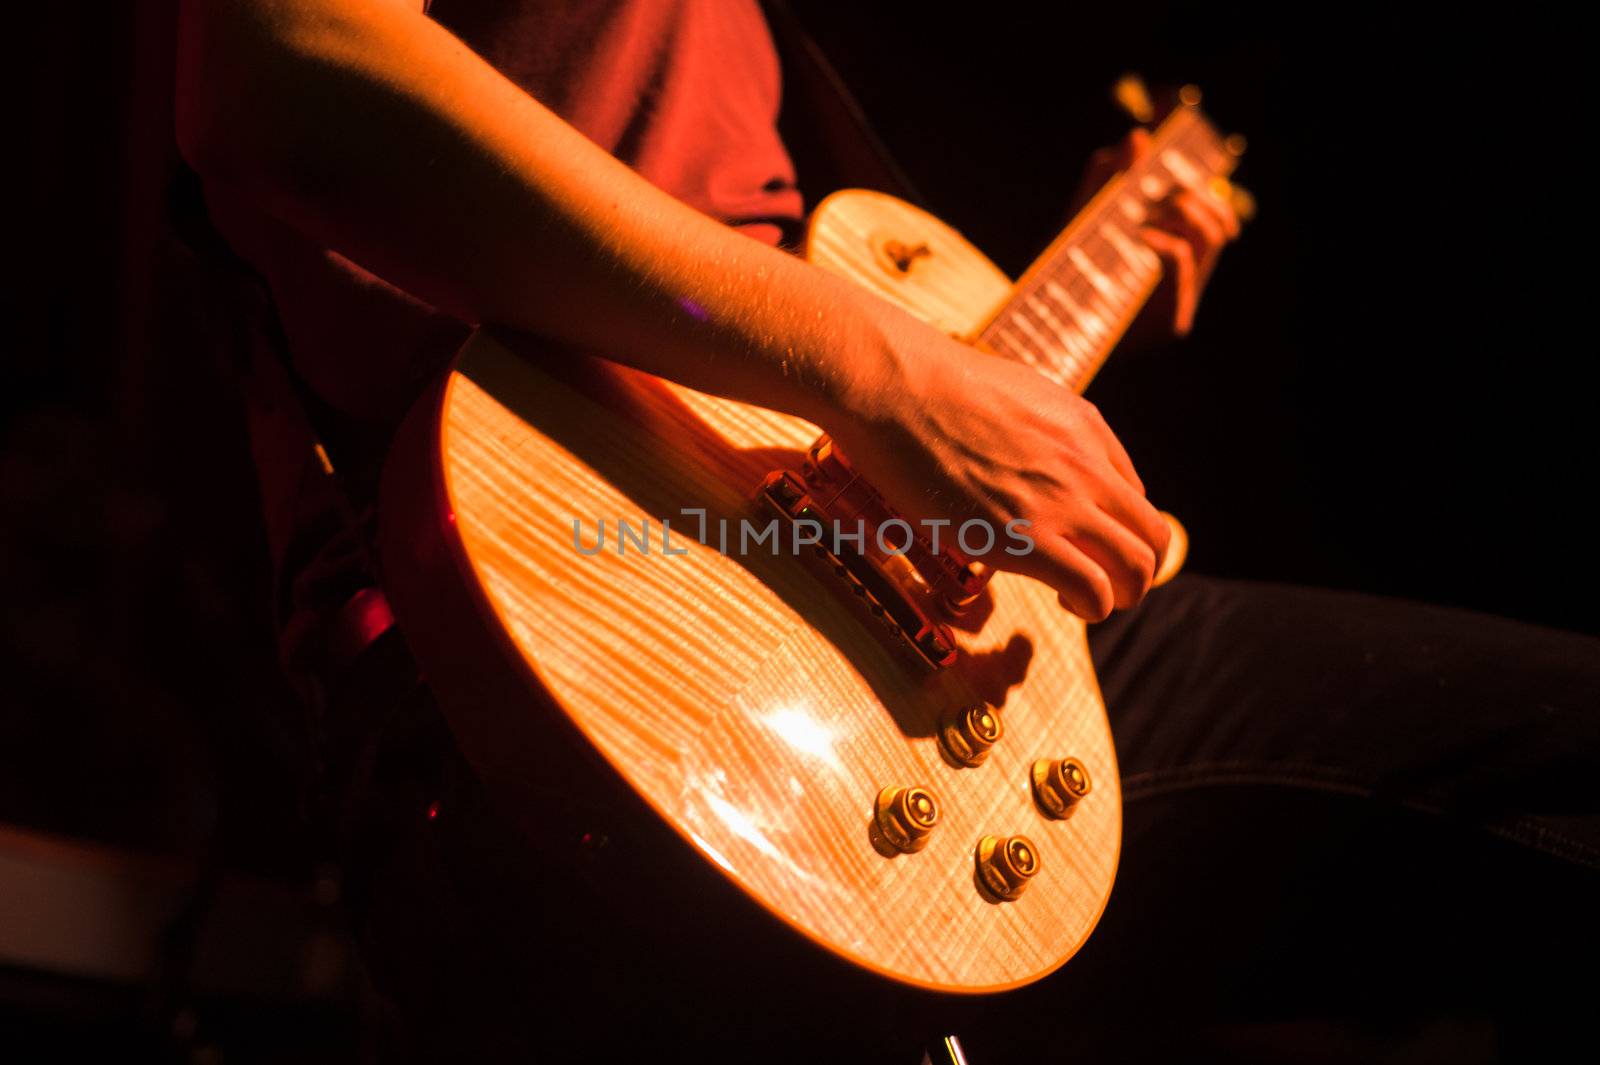 Guitarist on stage by edan